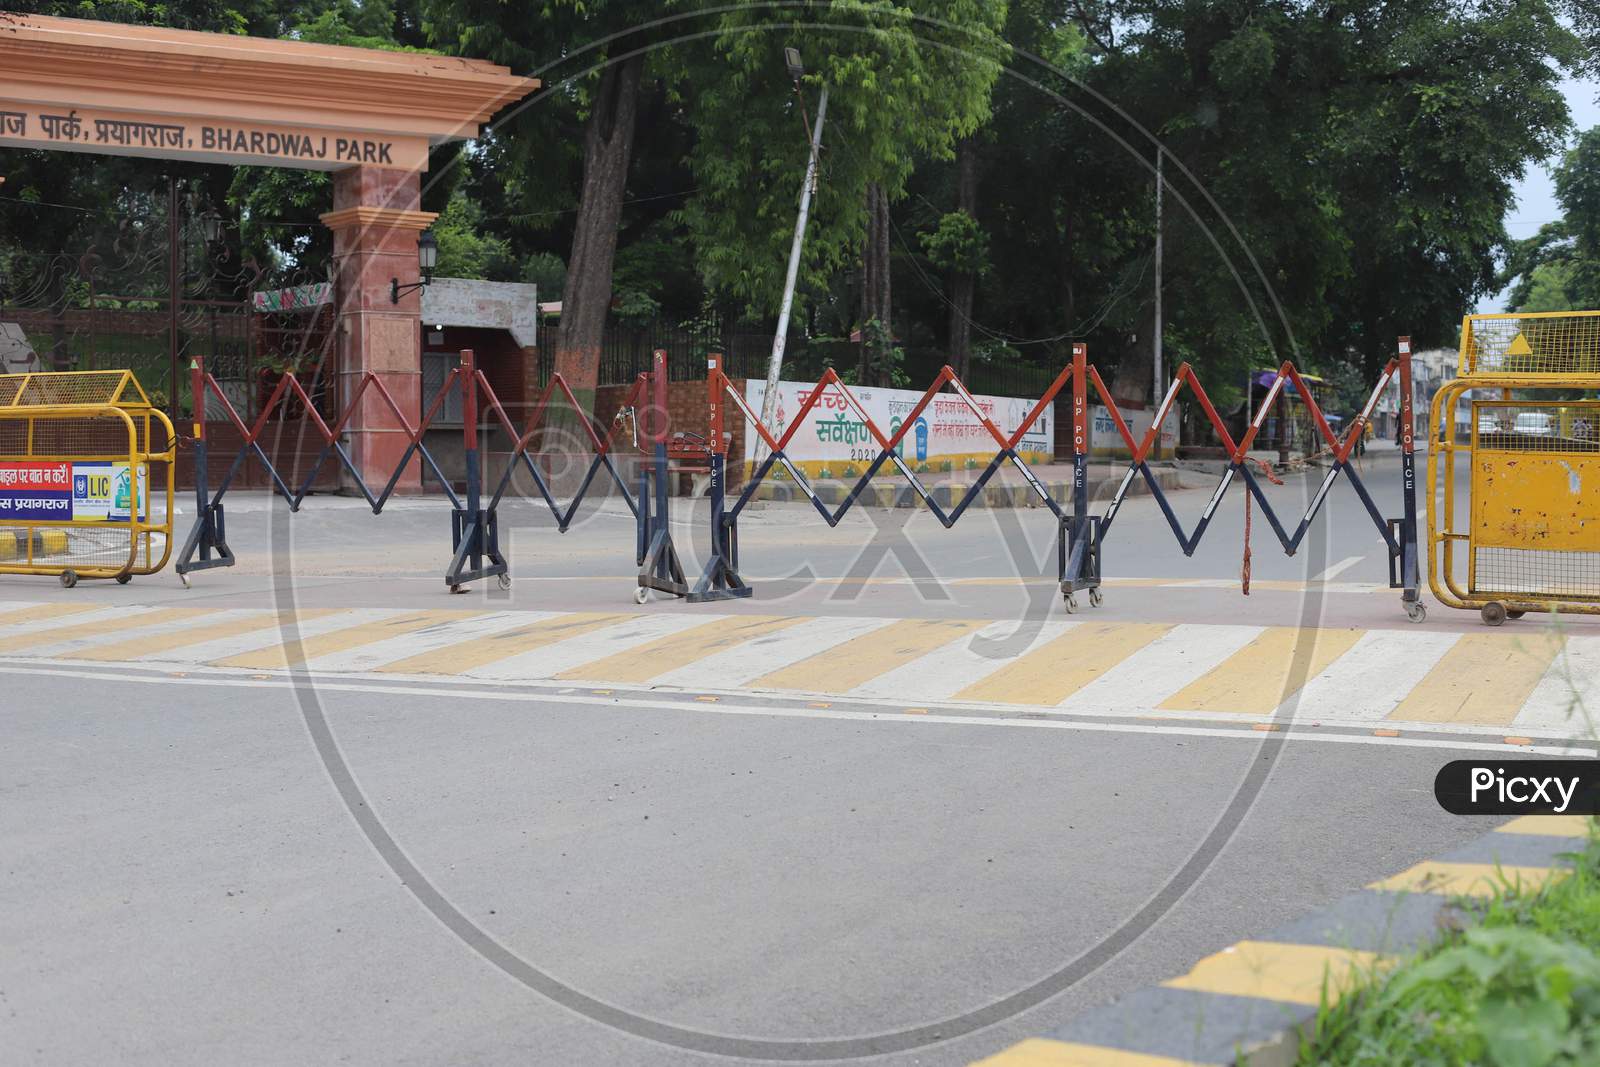 A View Of Empty Road During Lockdown To Slow The Spread Of The Coronavirus Disease (Covid-19) In Prayagraj, July 18, 2020